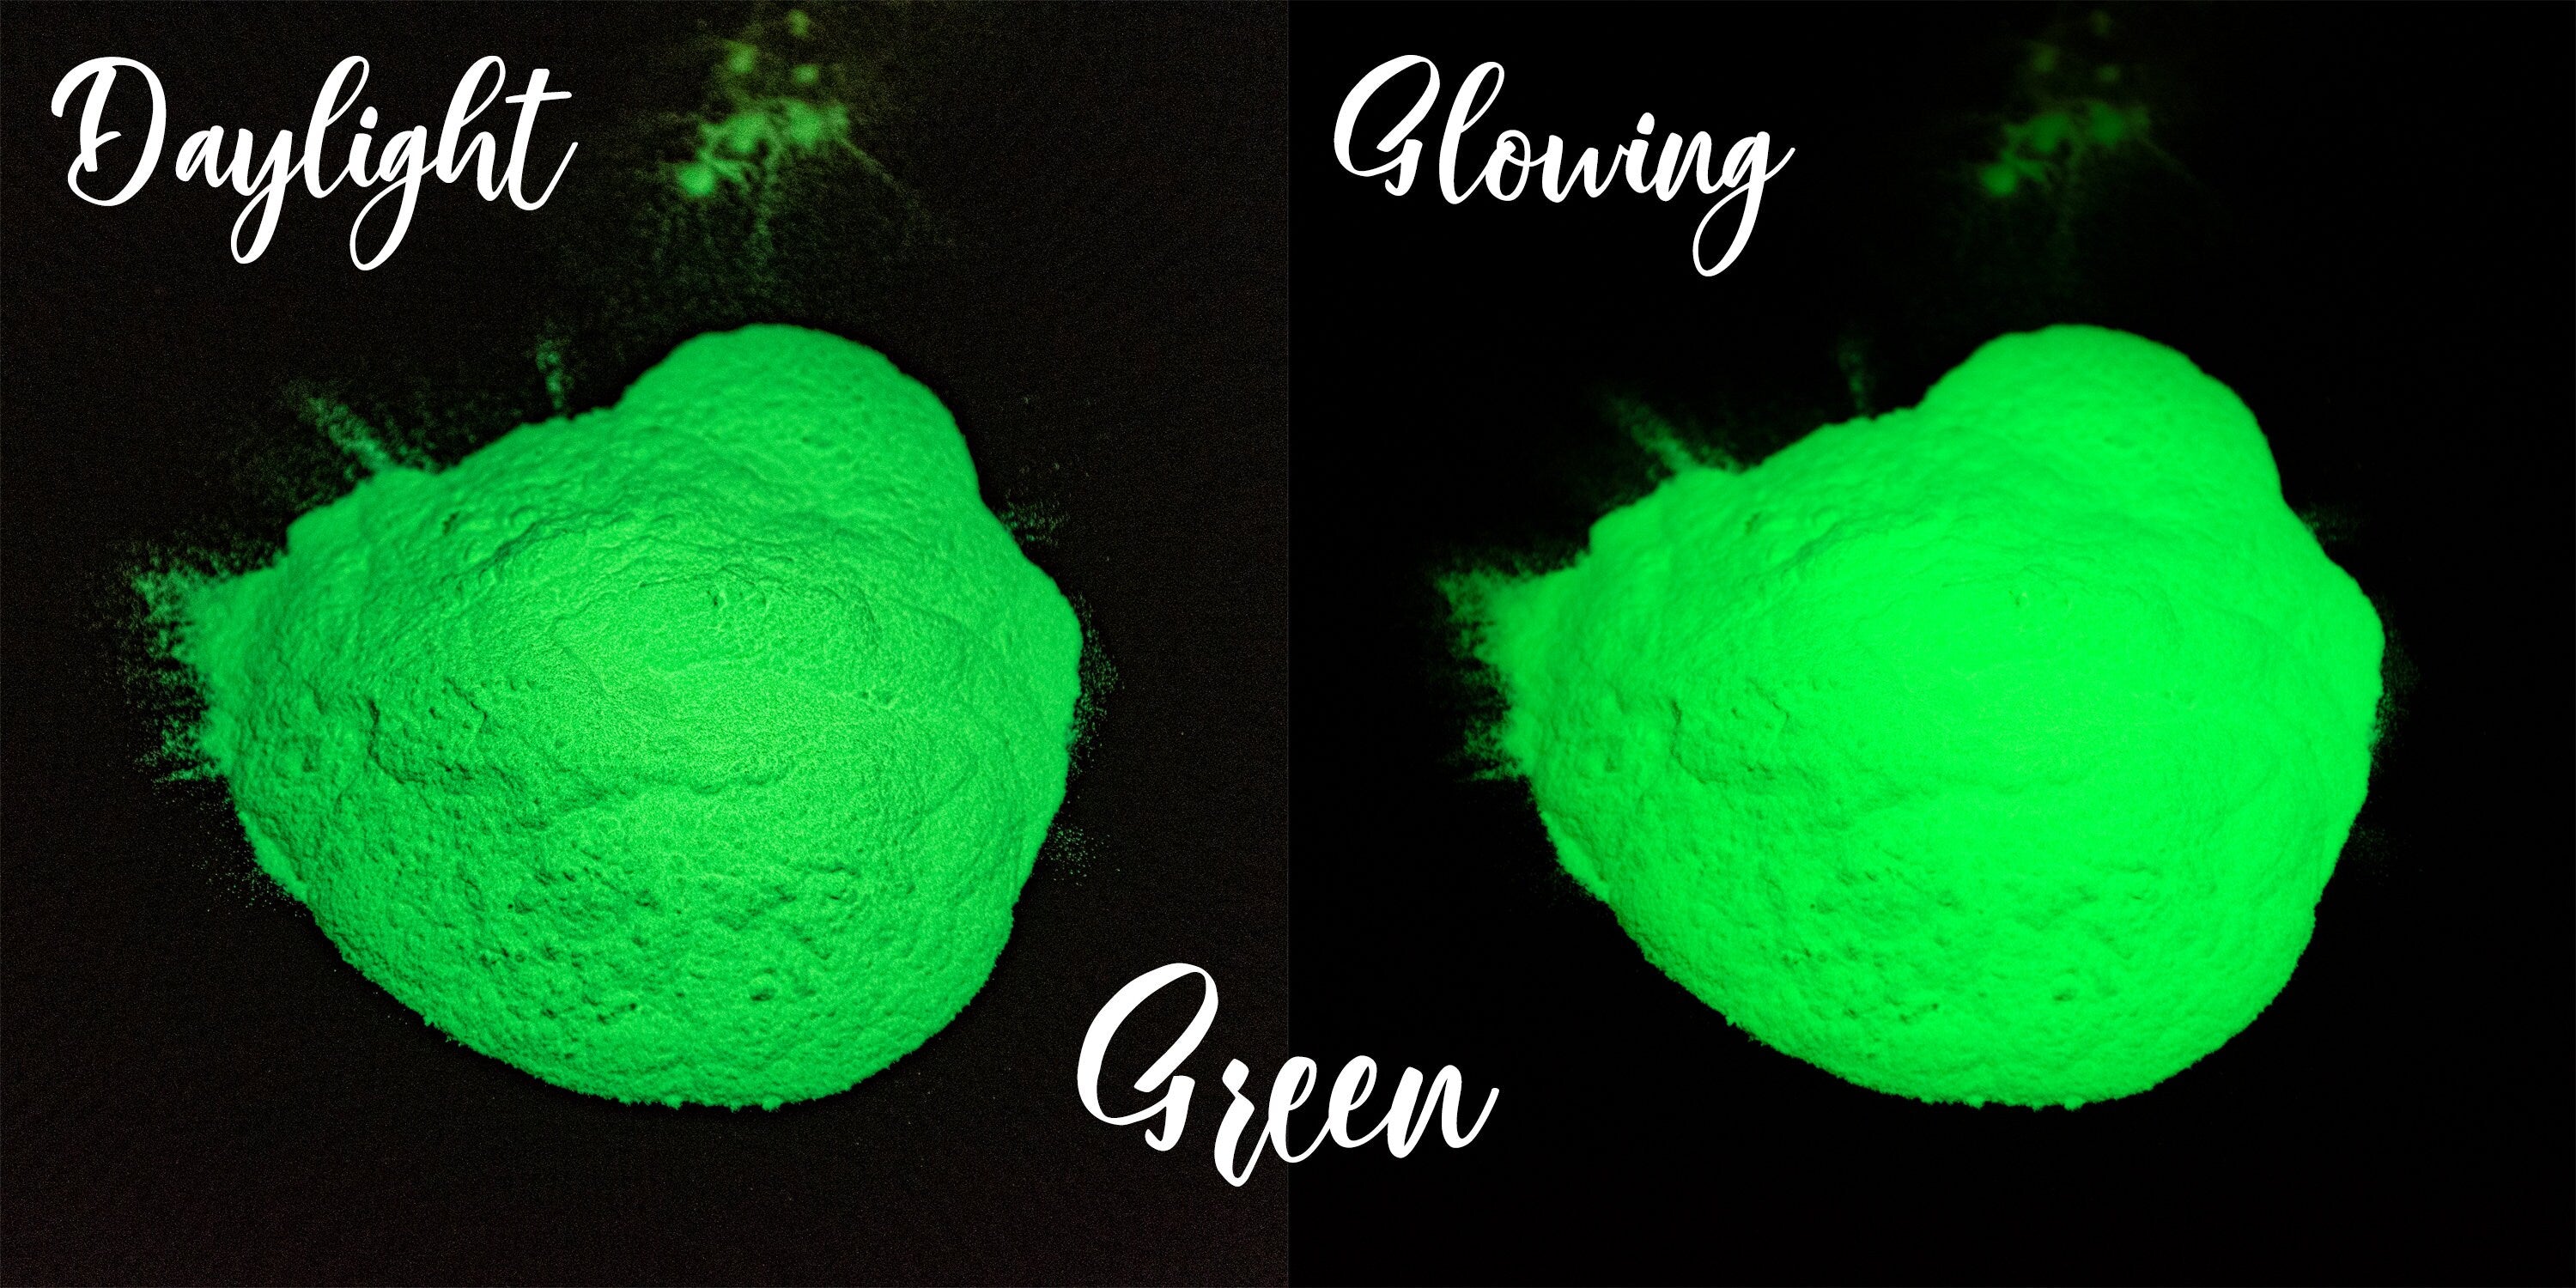 Glow in the Dark - Colored in Daylight - Pigment Powder Combo Pack for Epoxy Crafts